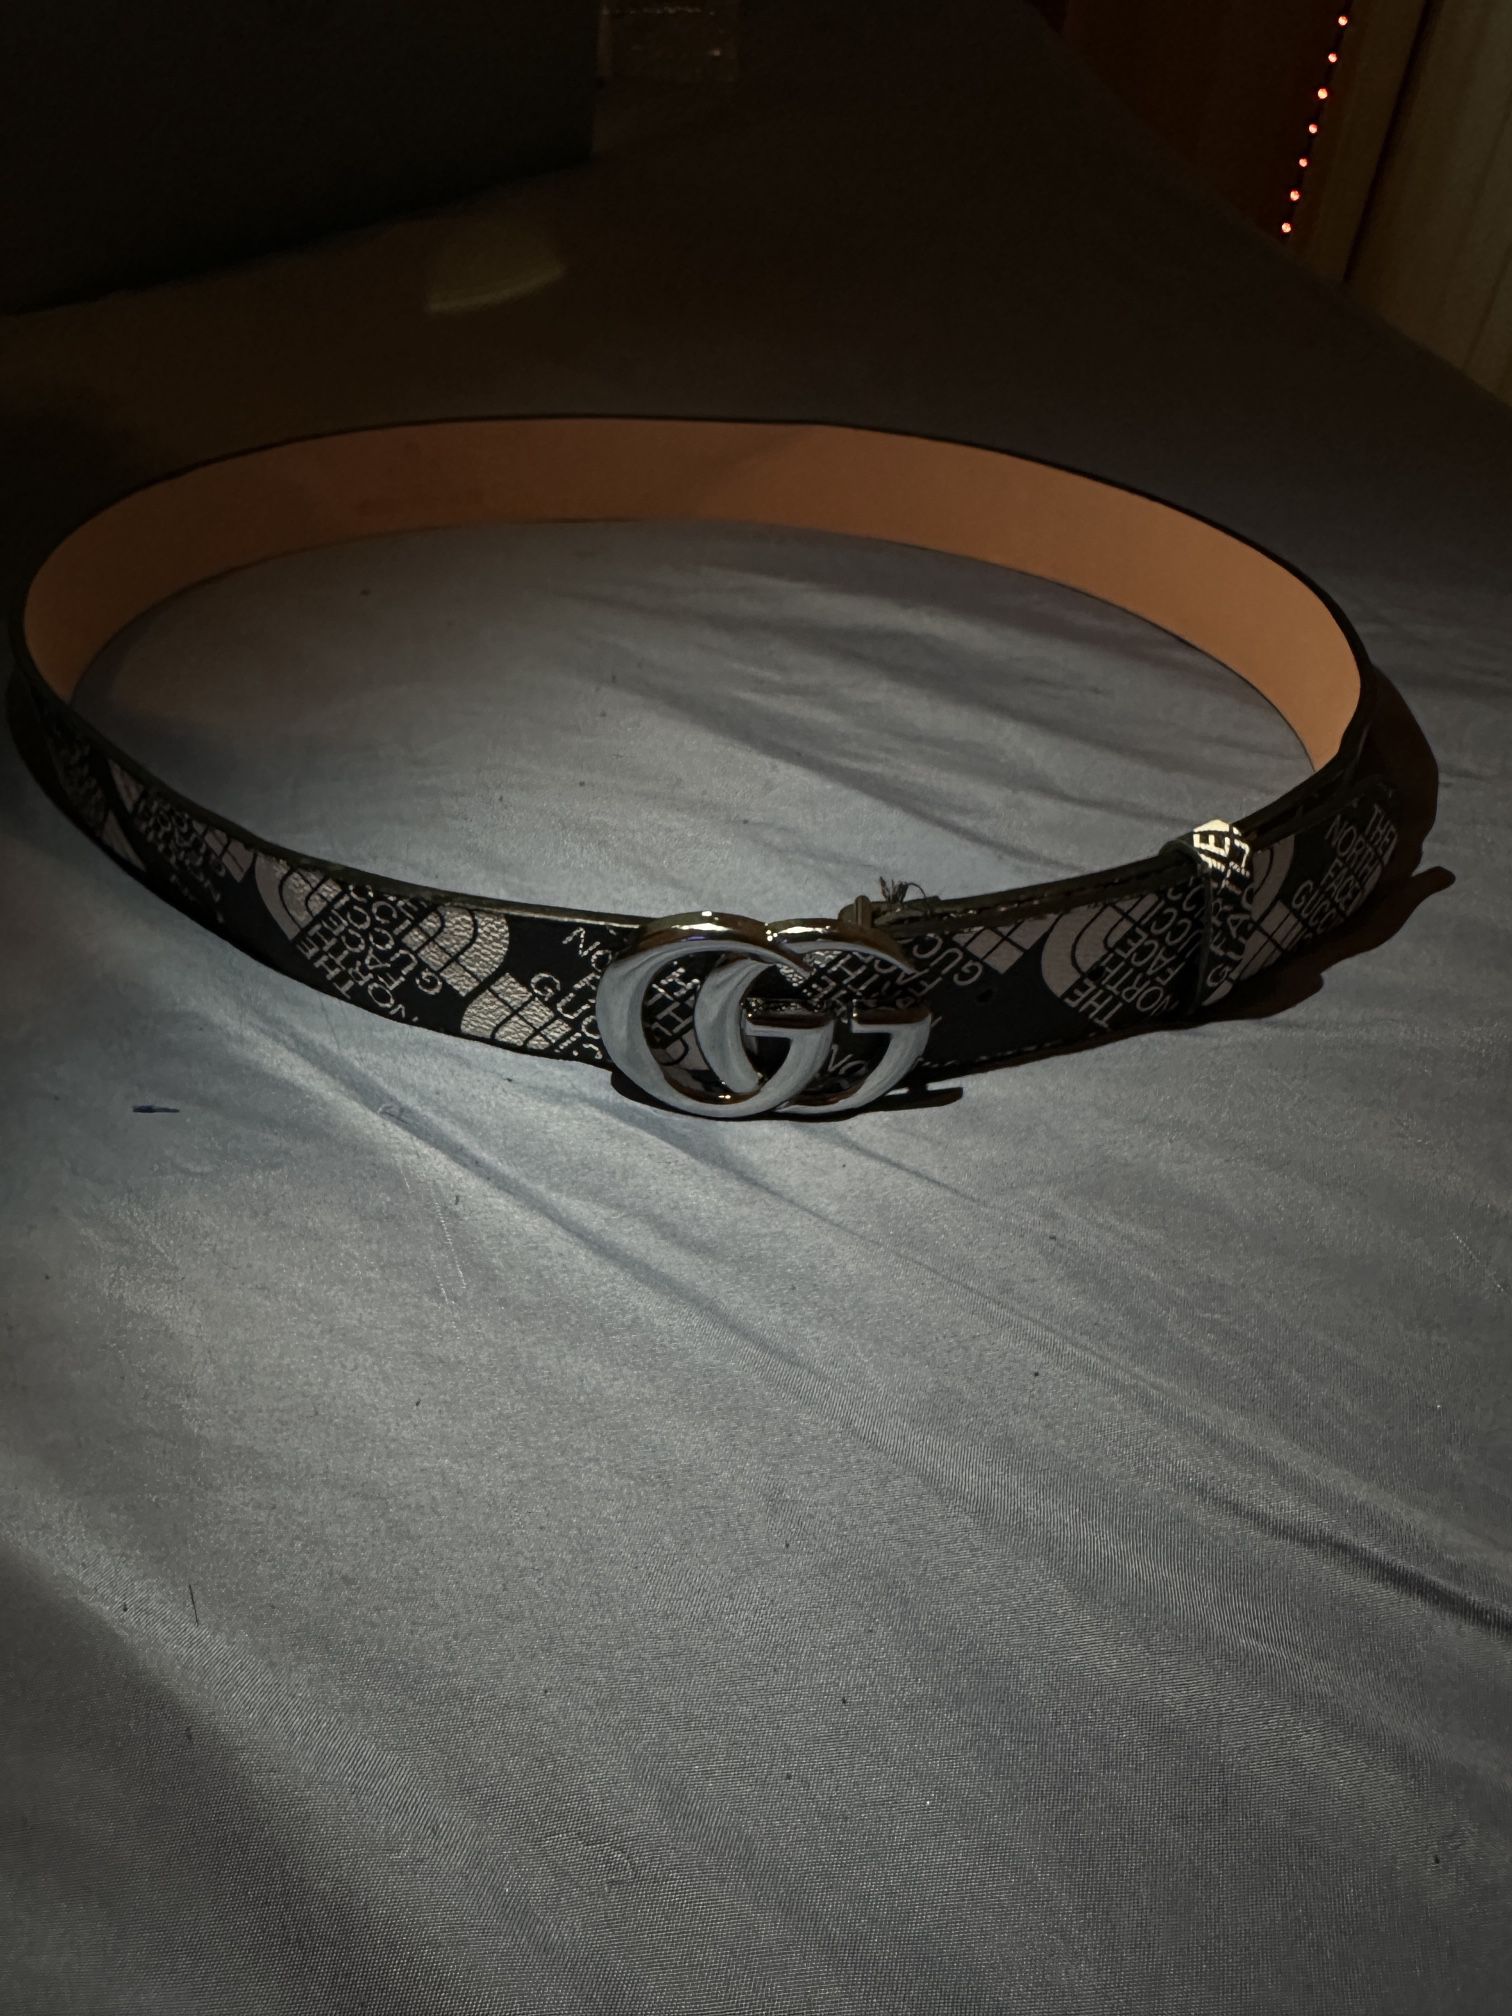 The North Face x Gucci Leather Belt